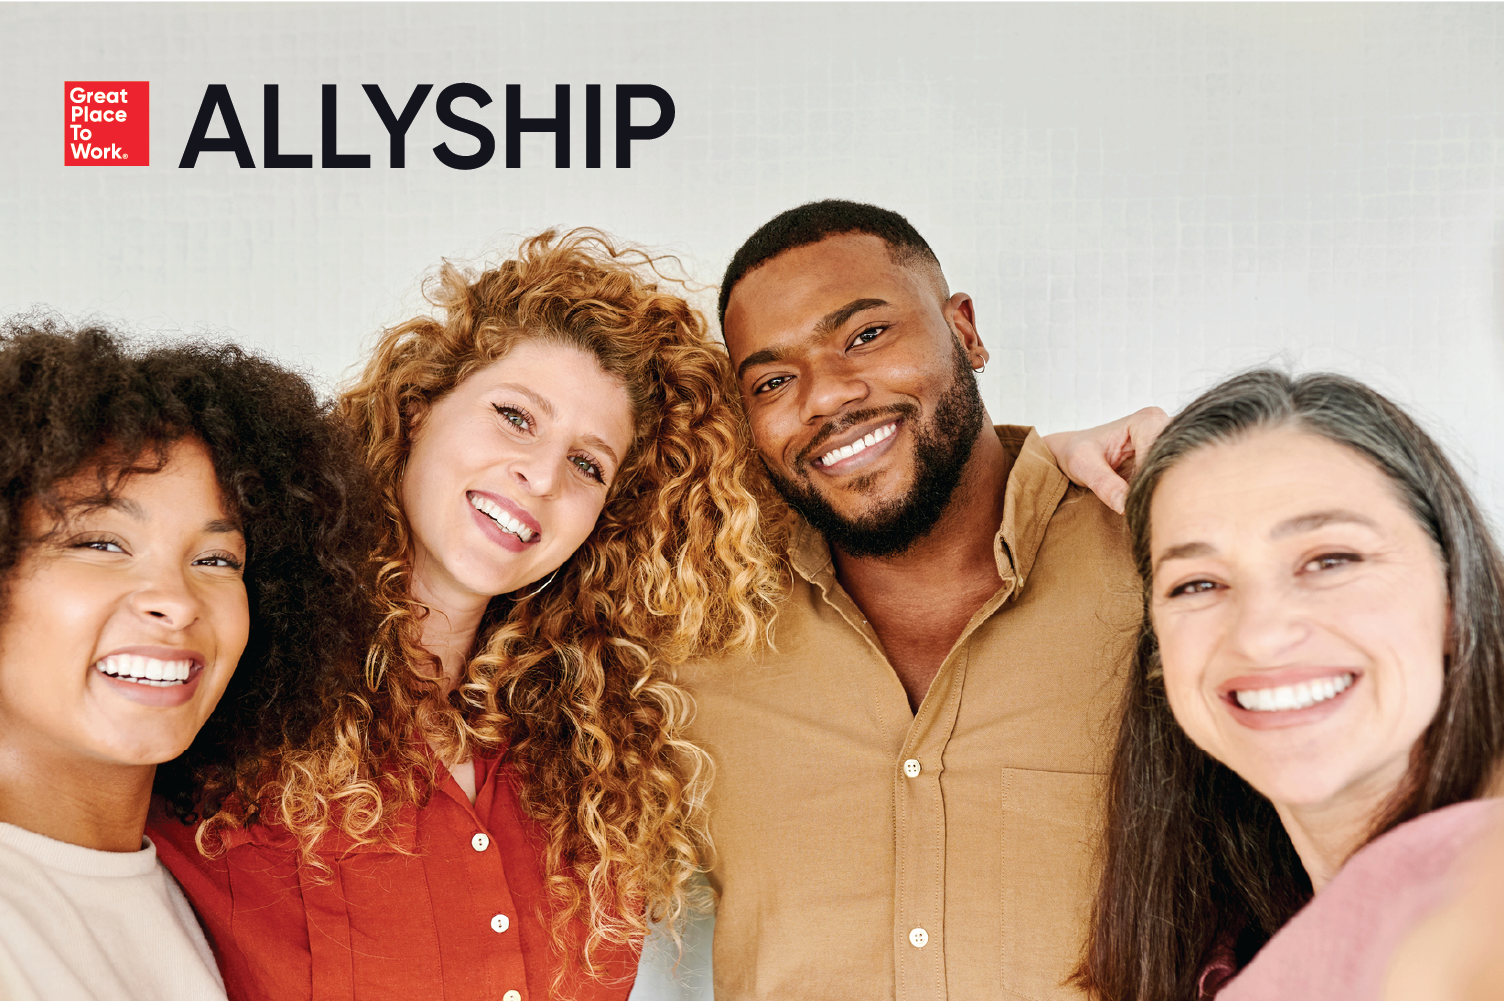  Allyship in the workplace. Four diverse employees stand together, arms linked